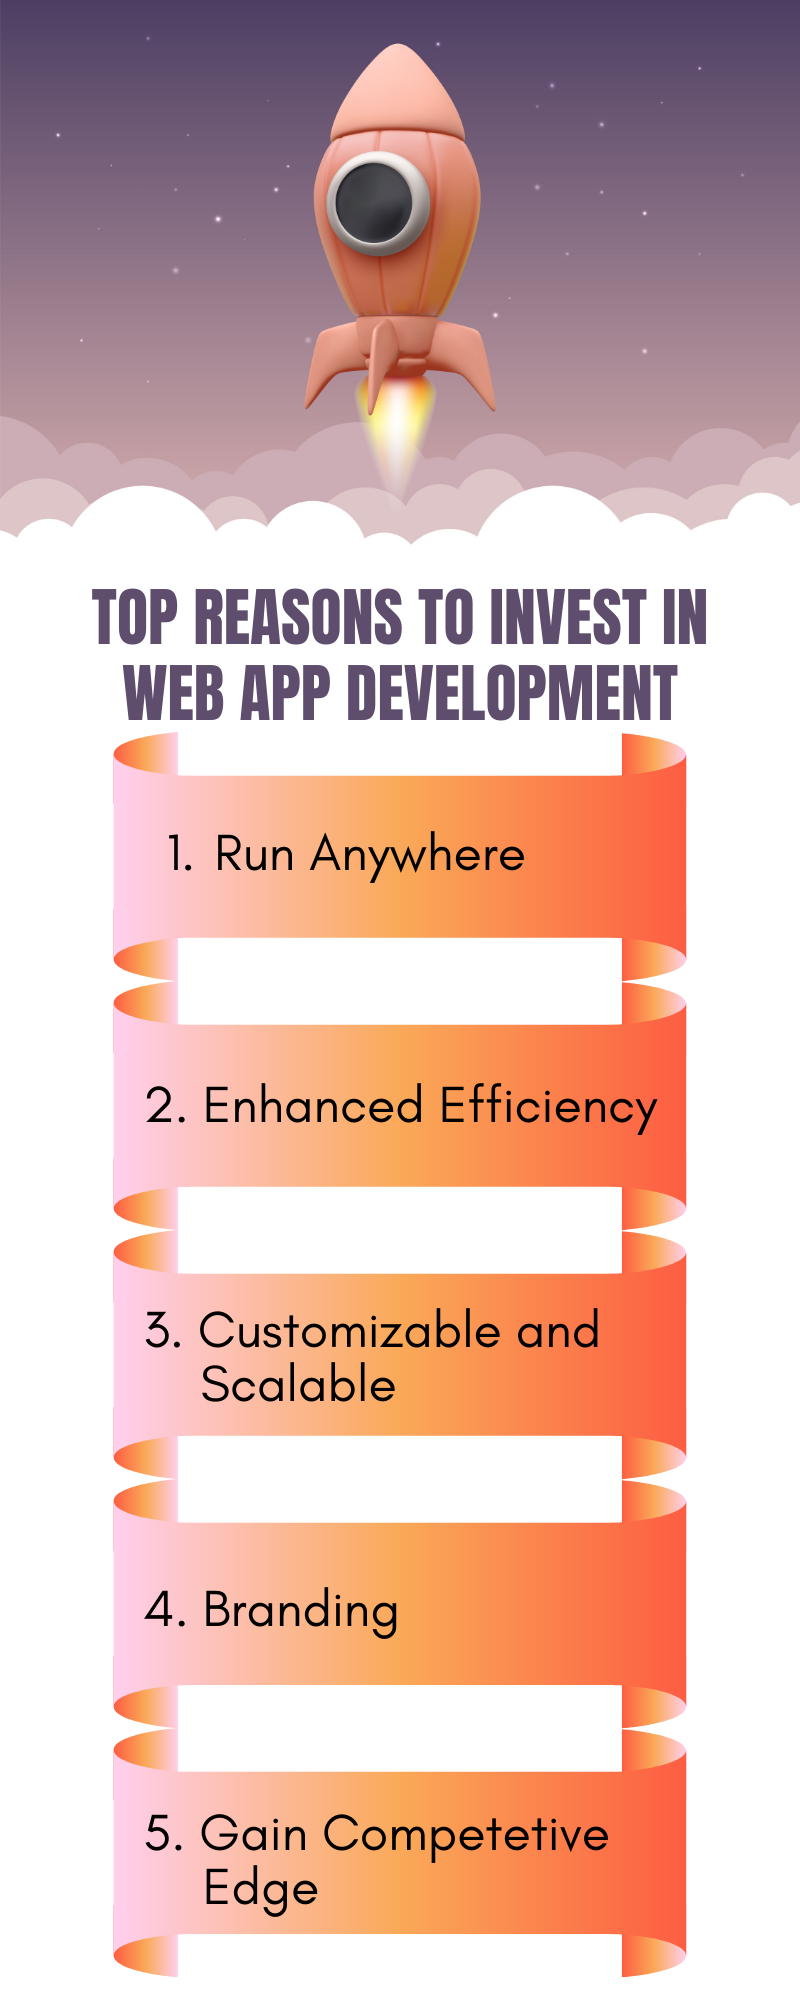 Top Reasons to Invest in Web App Development for Business Growth